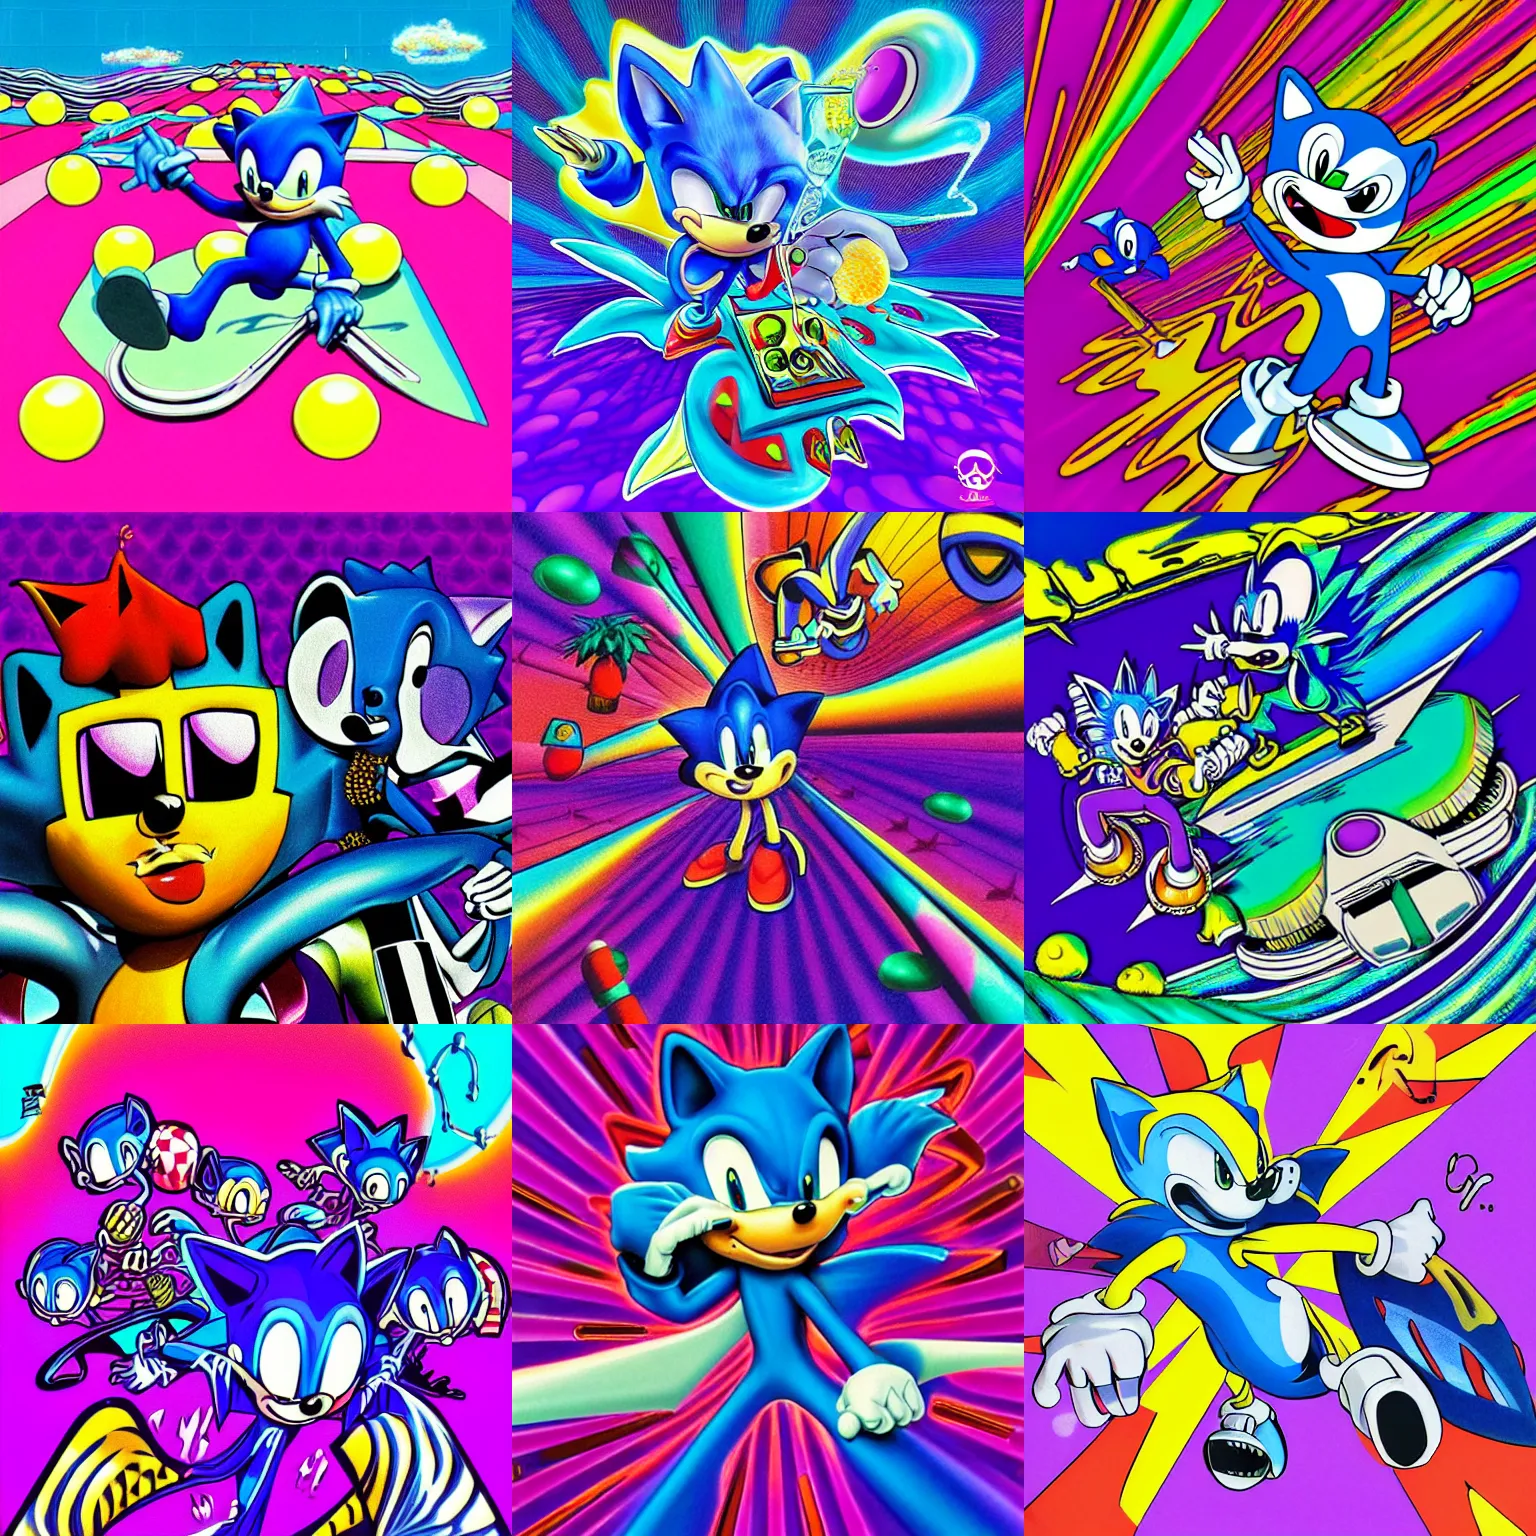 Prompt: surreal, sharp, lowbrow, detailed professional, high quality airbrush art mgmt album cover of a liquid dissolving lsd dmt blue sonic the hedgehog airbrush art surfing through cyberspace, purple checkerboard background, 1 9 9 0 s 1 9 9 2 acid house techno sega genesis video game album cover